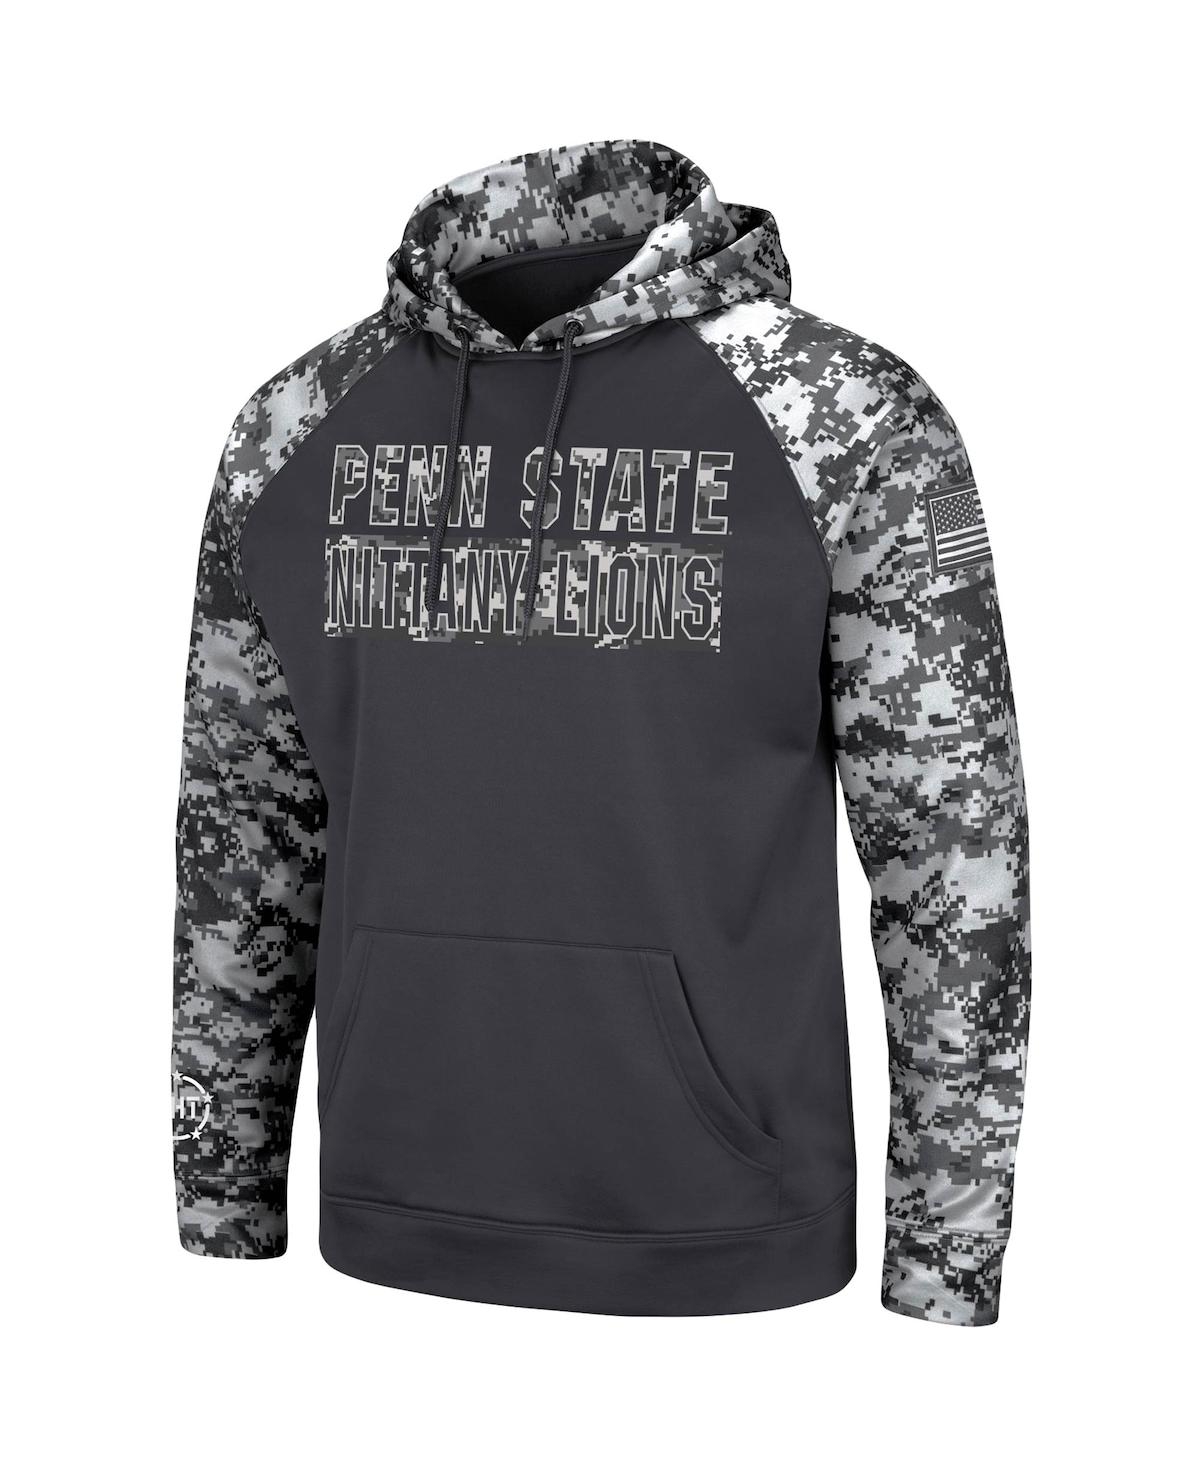 Shop Colosseum Men's Charcoal Penn State Nittany Lions Oht Military-inspired Appreciation Digital Camo Pullover Hoo